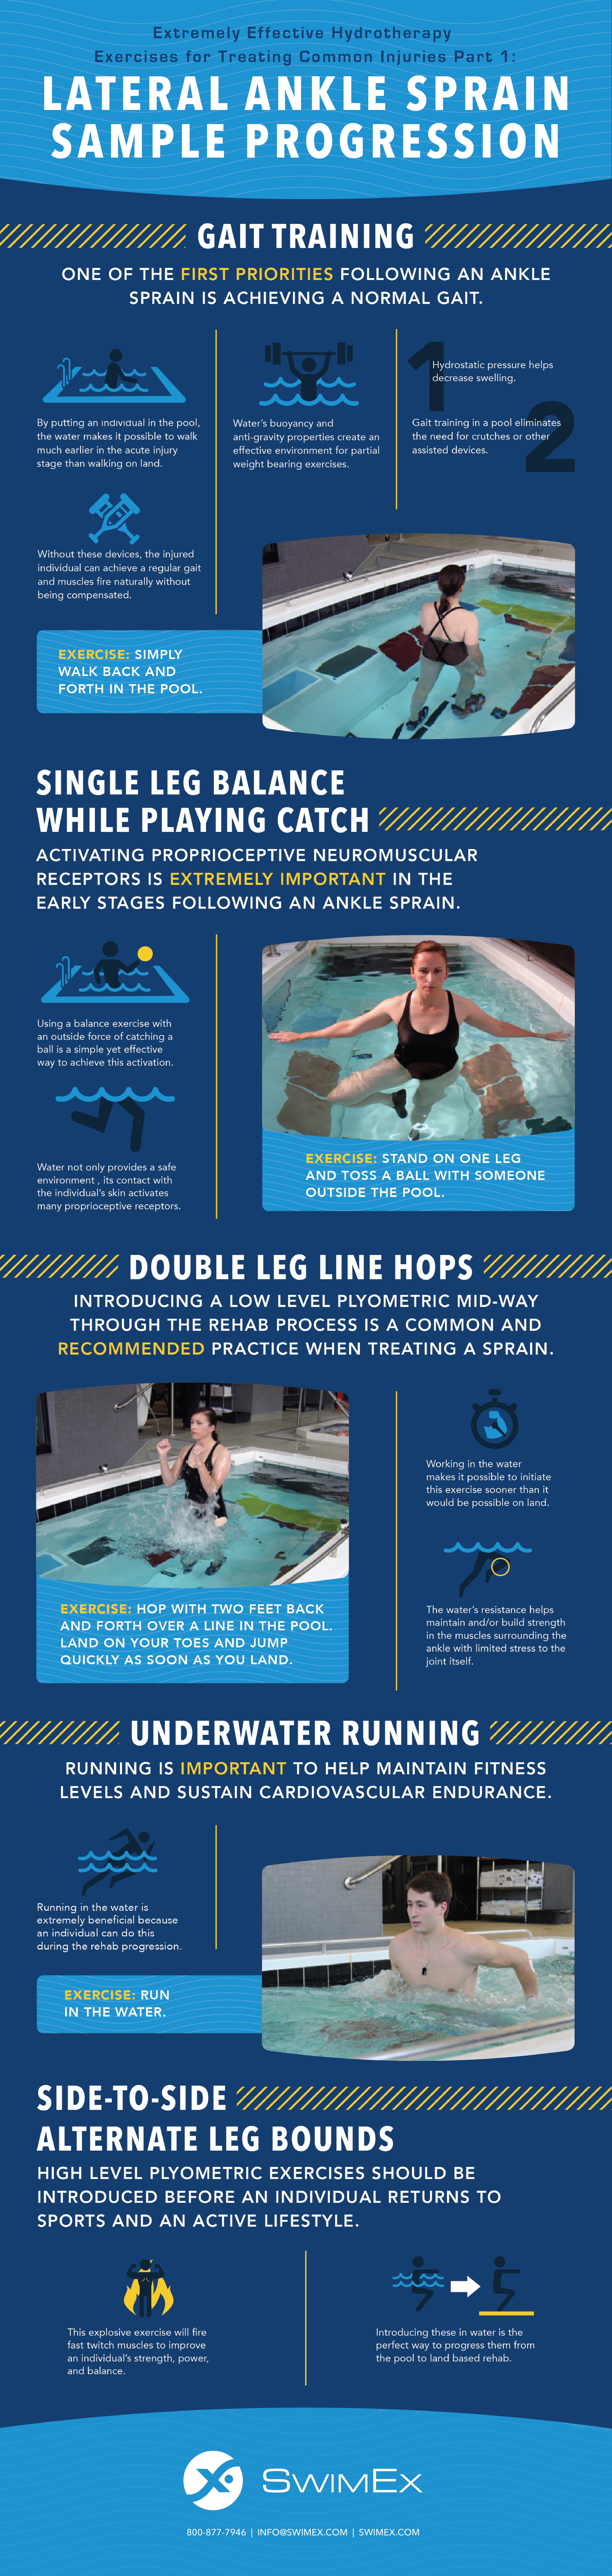 hydrotherapy exercises